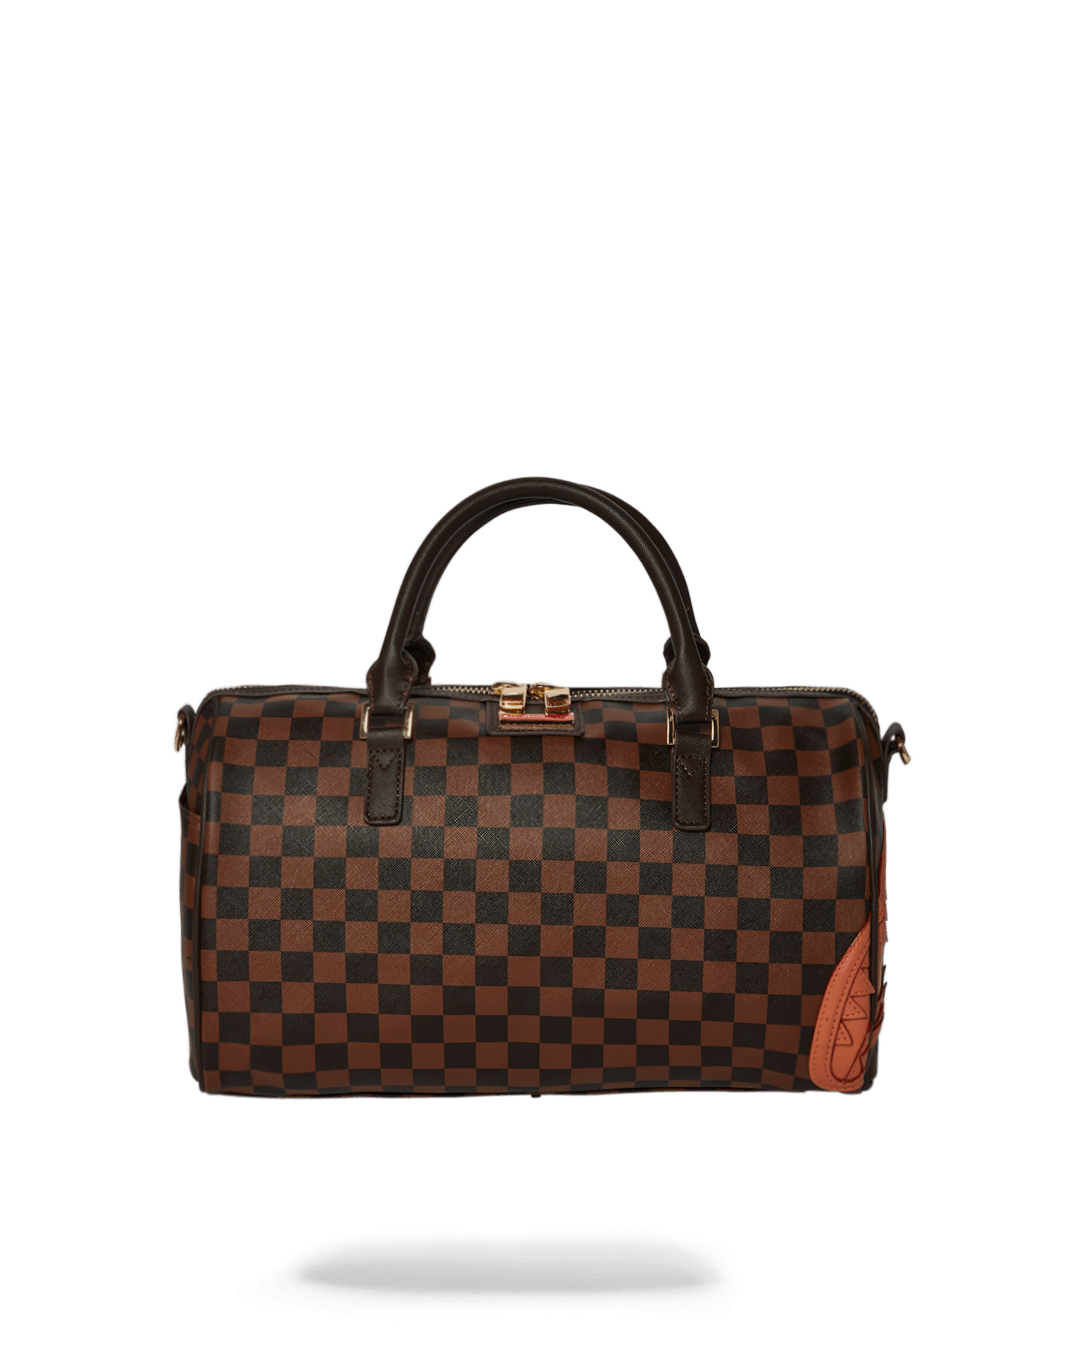 HENNY MINI DUFFLE - HIGH QUALITY AND INEXPENSIVE - HENNY MINI DUFFLE HIGH QUALITY AND INEXPENSIVE-01-0